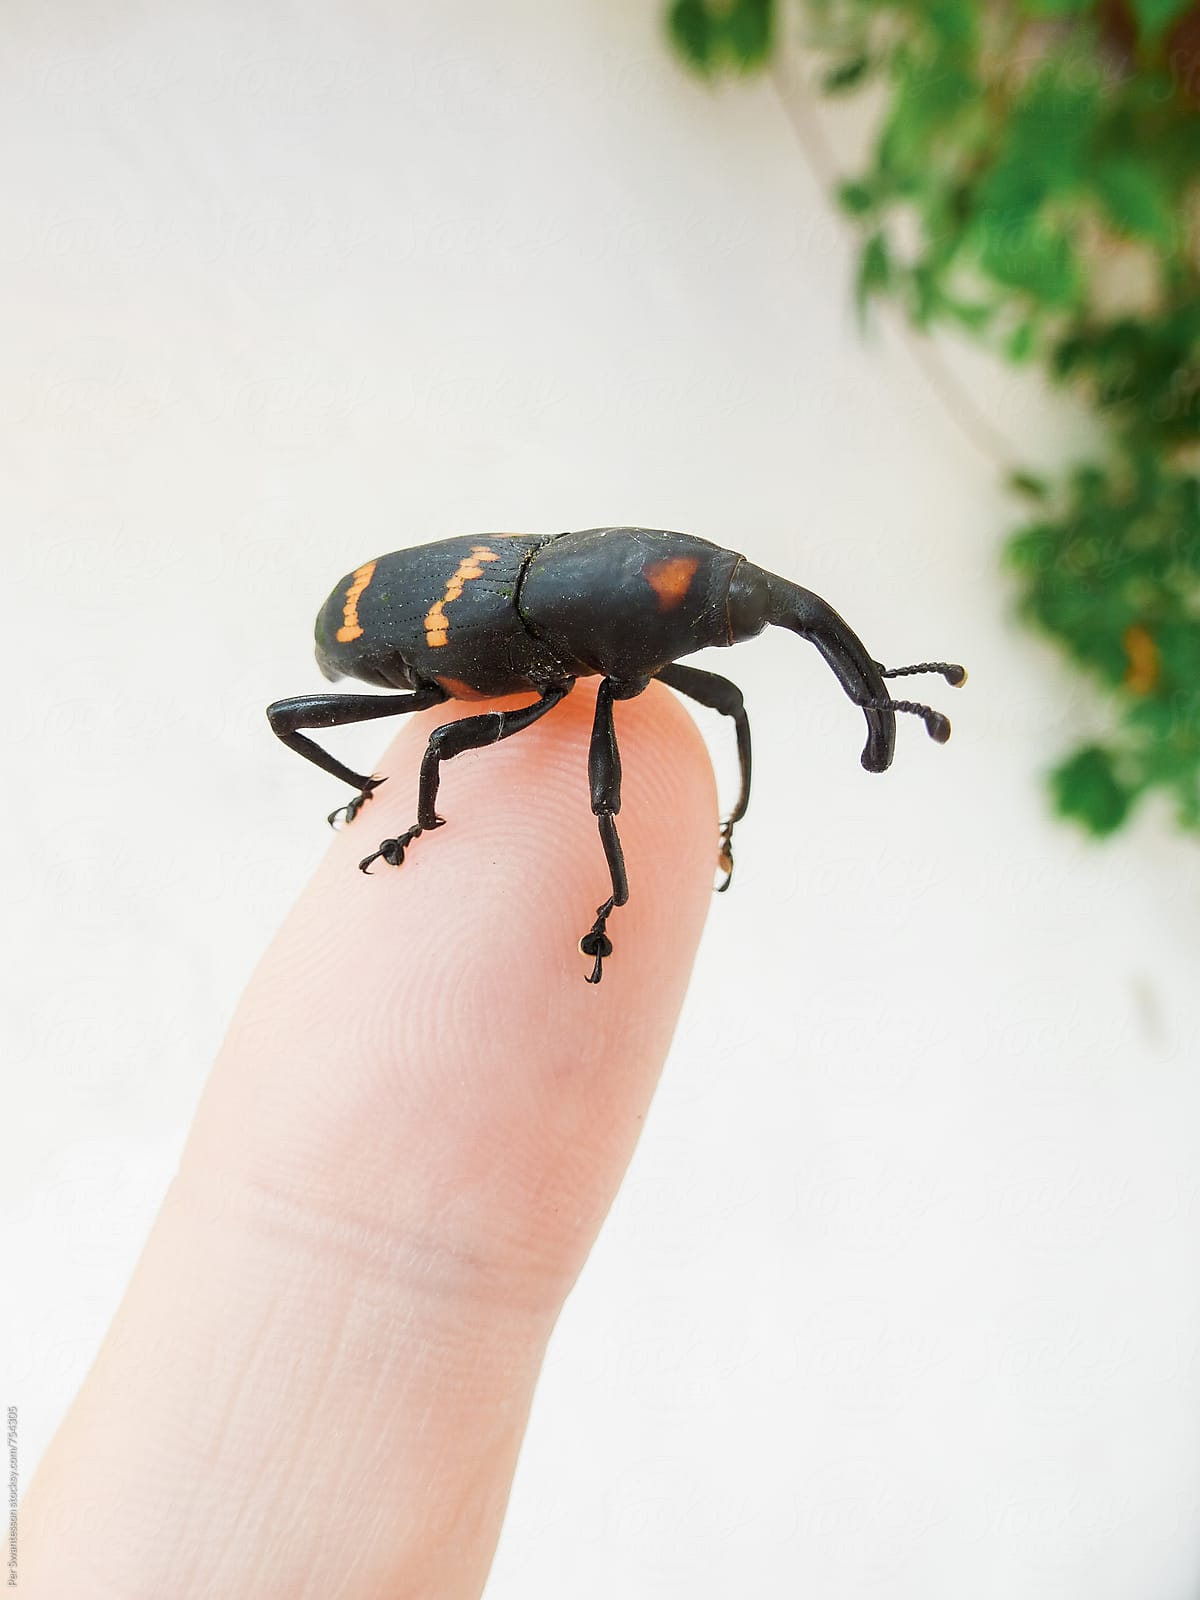 Nature science: Learning about nature, biology, Beetle on finger